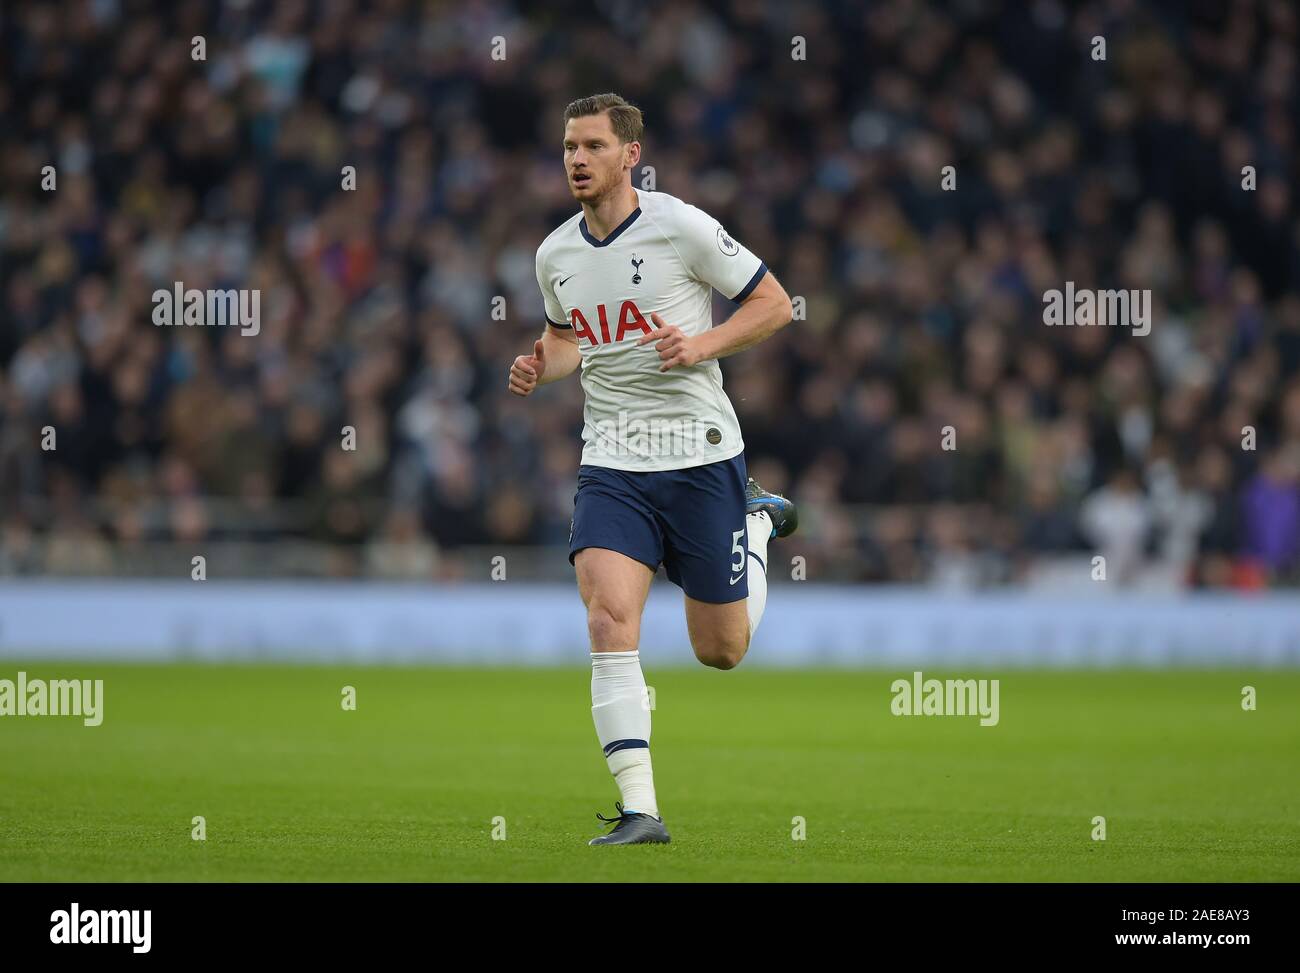 London, UK. 7th December 2019. Jan Vertonghen of Tottenham Hotspur during the Tottenham Hotspur vs Burnley Premier League Football match at the Tottenham Hotspur Stadium on 7th December 2019-EDITORIAL USE ONLY No use with unauthorised audio, video, data, fixture lists (outside the EU), club/league logos or 'live' services. Online in-match use limited to 45 images (+15 in extra time). No use to emulate moving images. No use in betting, games or single club/league/player publications/services- Credit: Martin Dalton/Alamy Live News Stock Photo